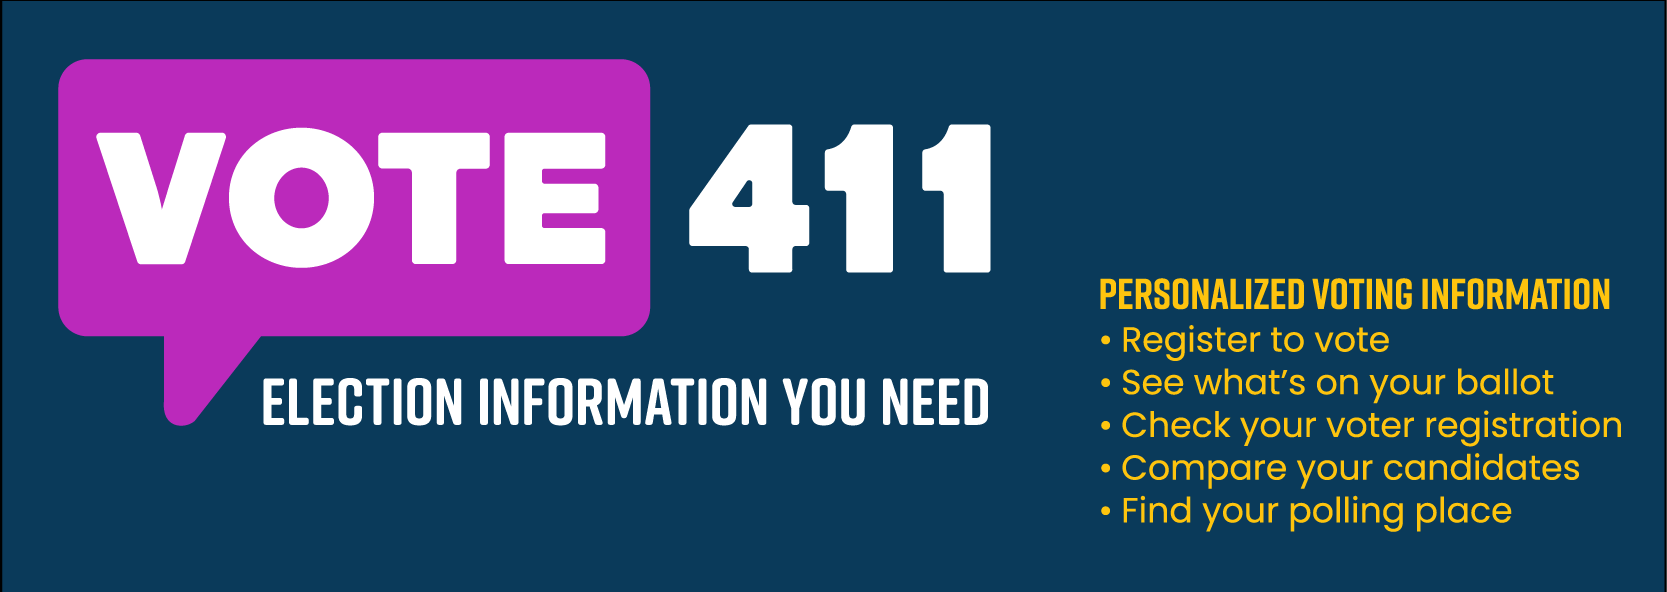 vote411 logo election information you need personalized voting information, see whats on your ballot, check your voter registration, compare candidates, find your polling place